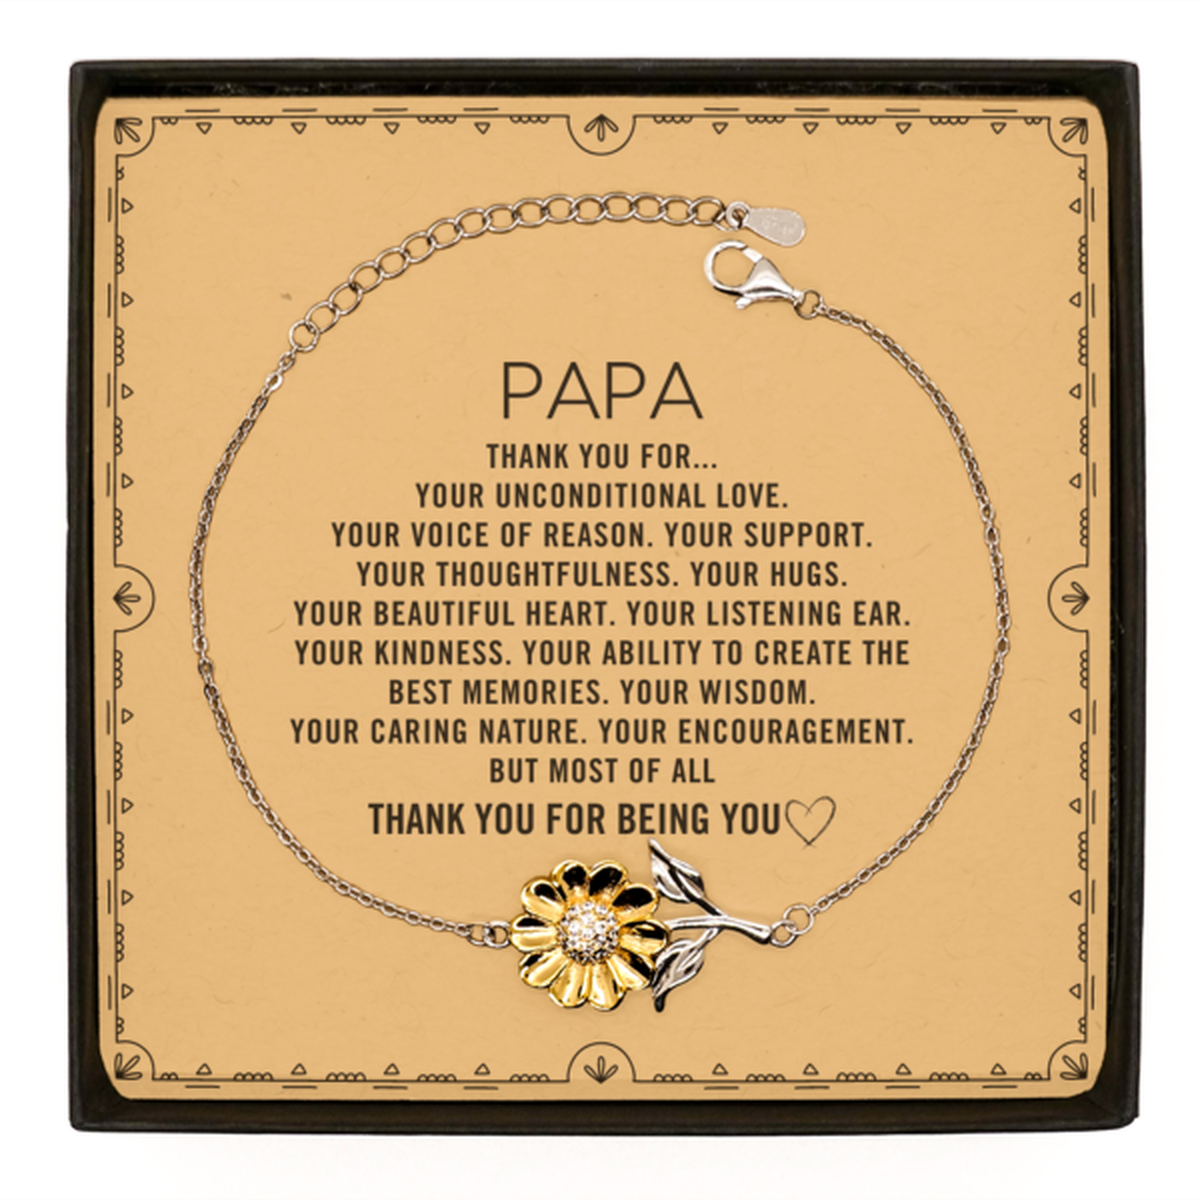 Papa Sunflower Bracelet Custom, Message Card Gifts For Papa Christmas Graduation Birthday Gifts for Men Women Papa Thank you for Your unconditional love